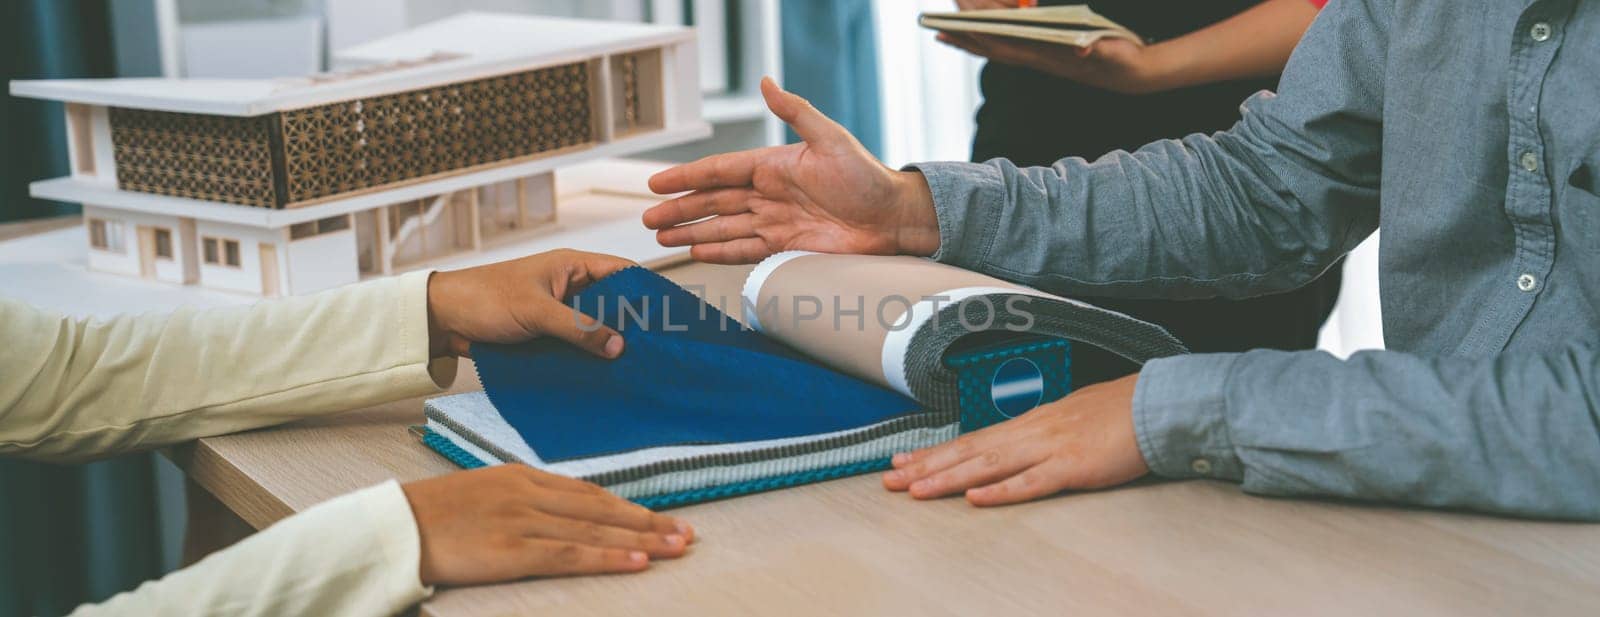 Skilled interior designer presents curtain material during customer selects material carefully with house model placed on table at modern office. Creative working and design concept. Variegated.